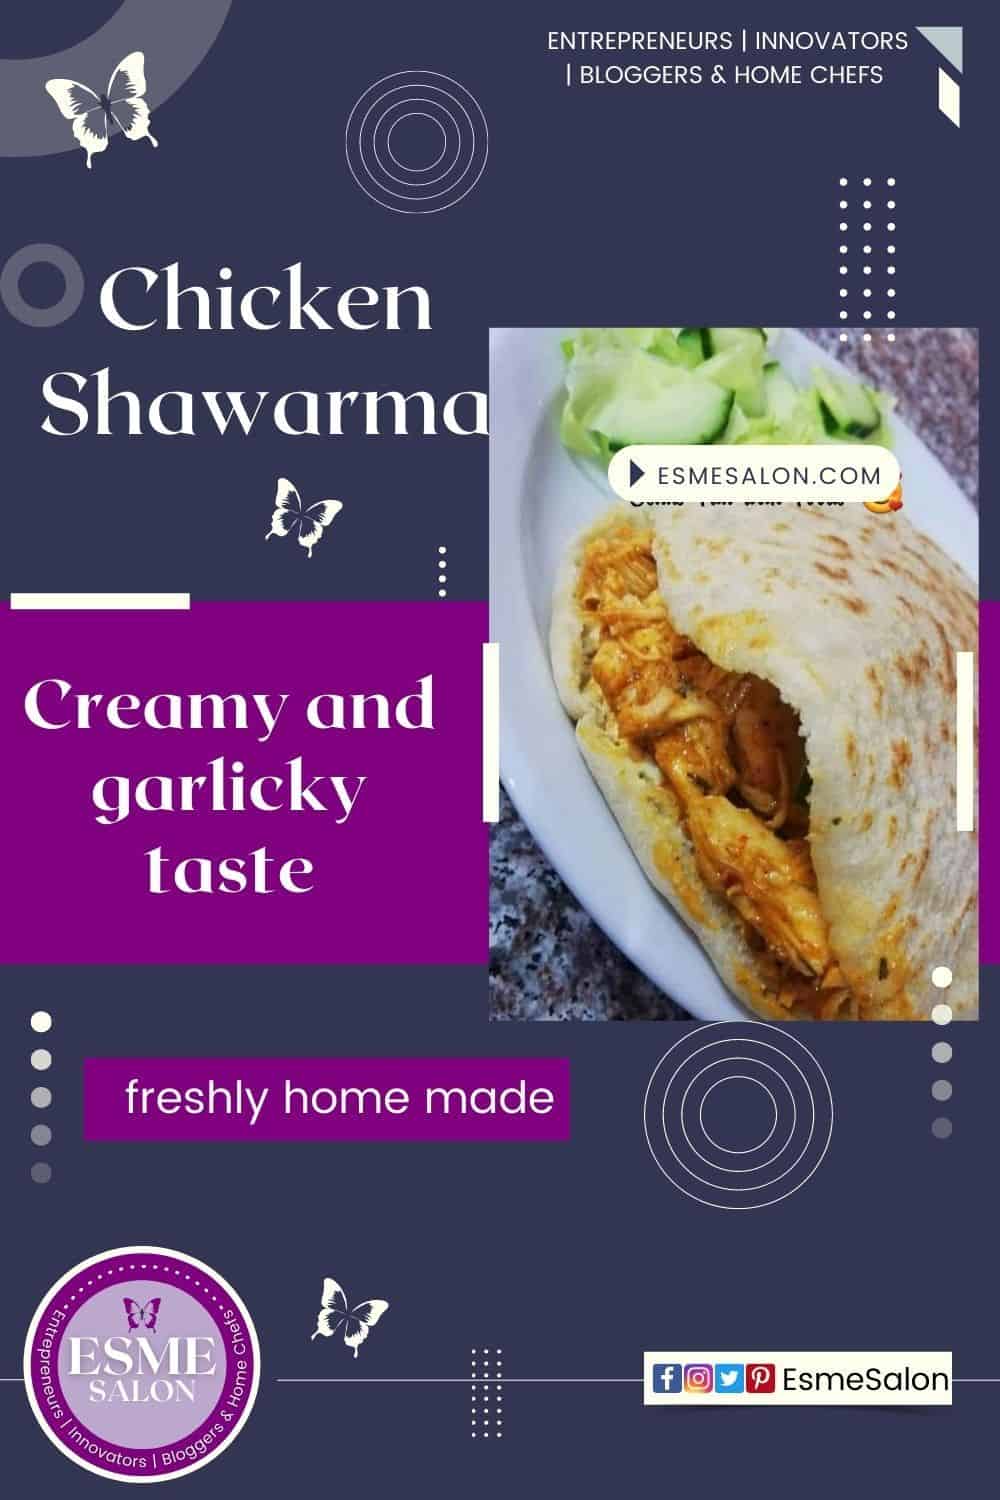 Chicken Shawarma made with yoghurt, garlic paste, braai sauce and placed in a homemade Pita bread